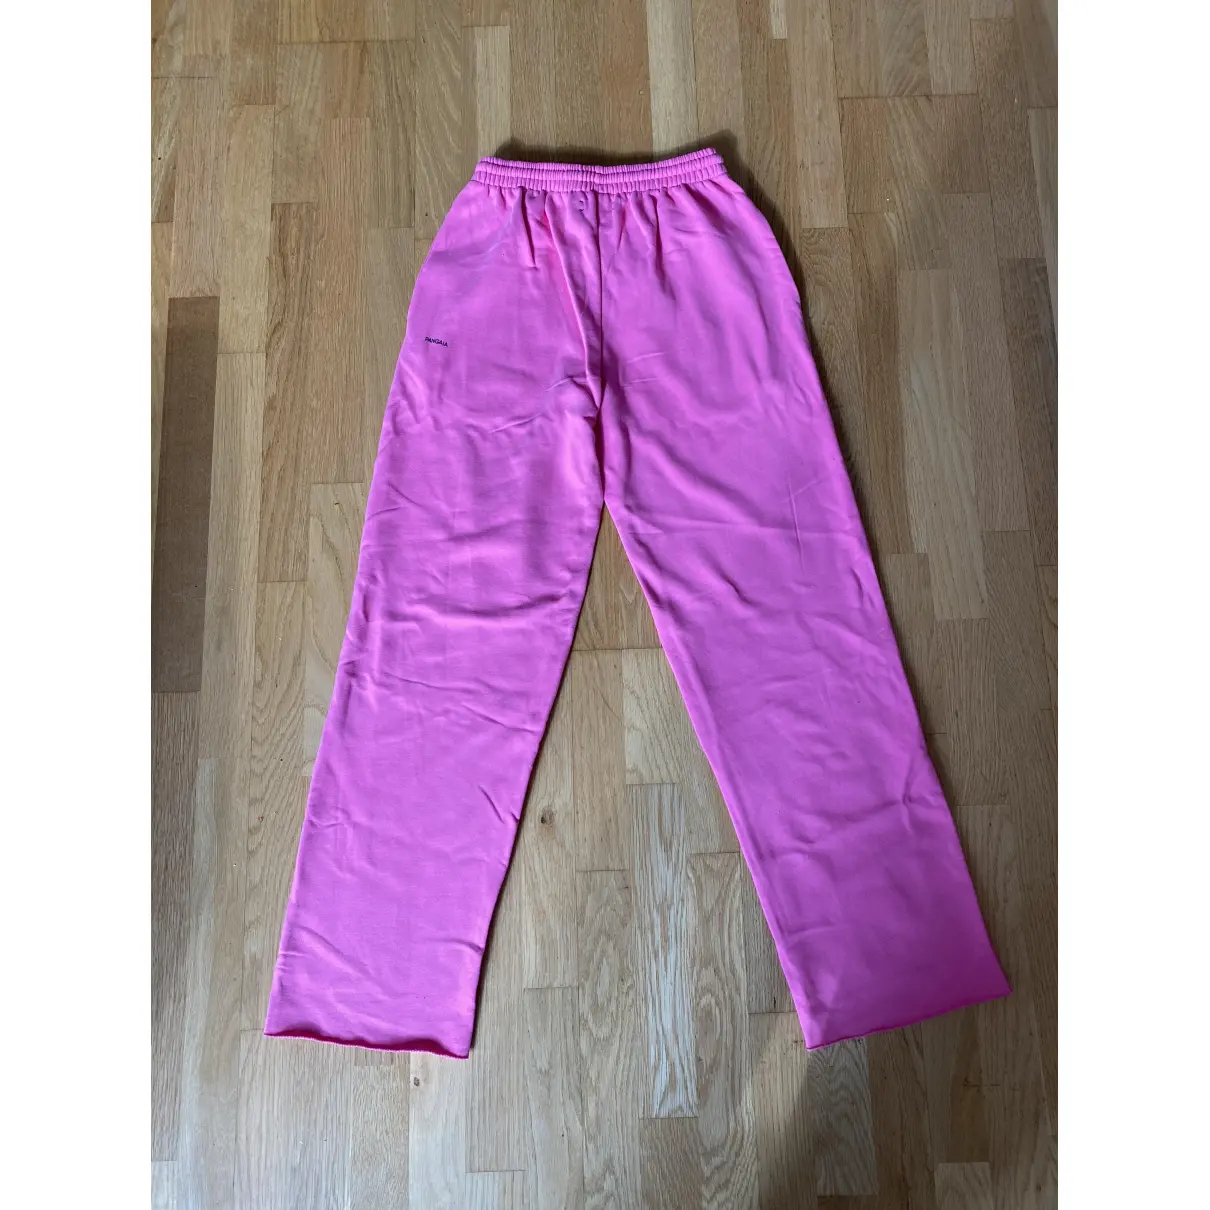 Buy The Pangaia Straight pants online